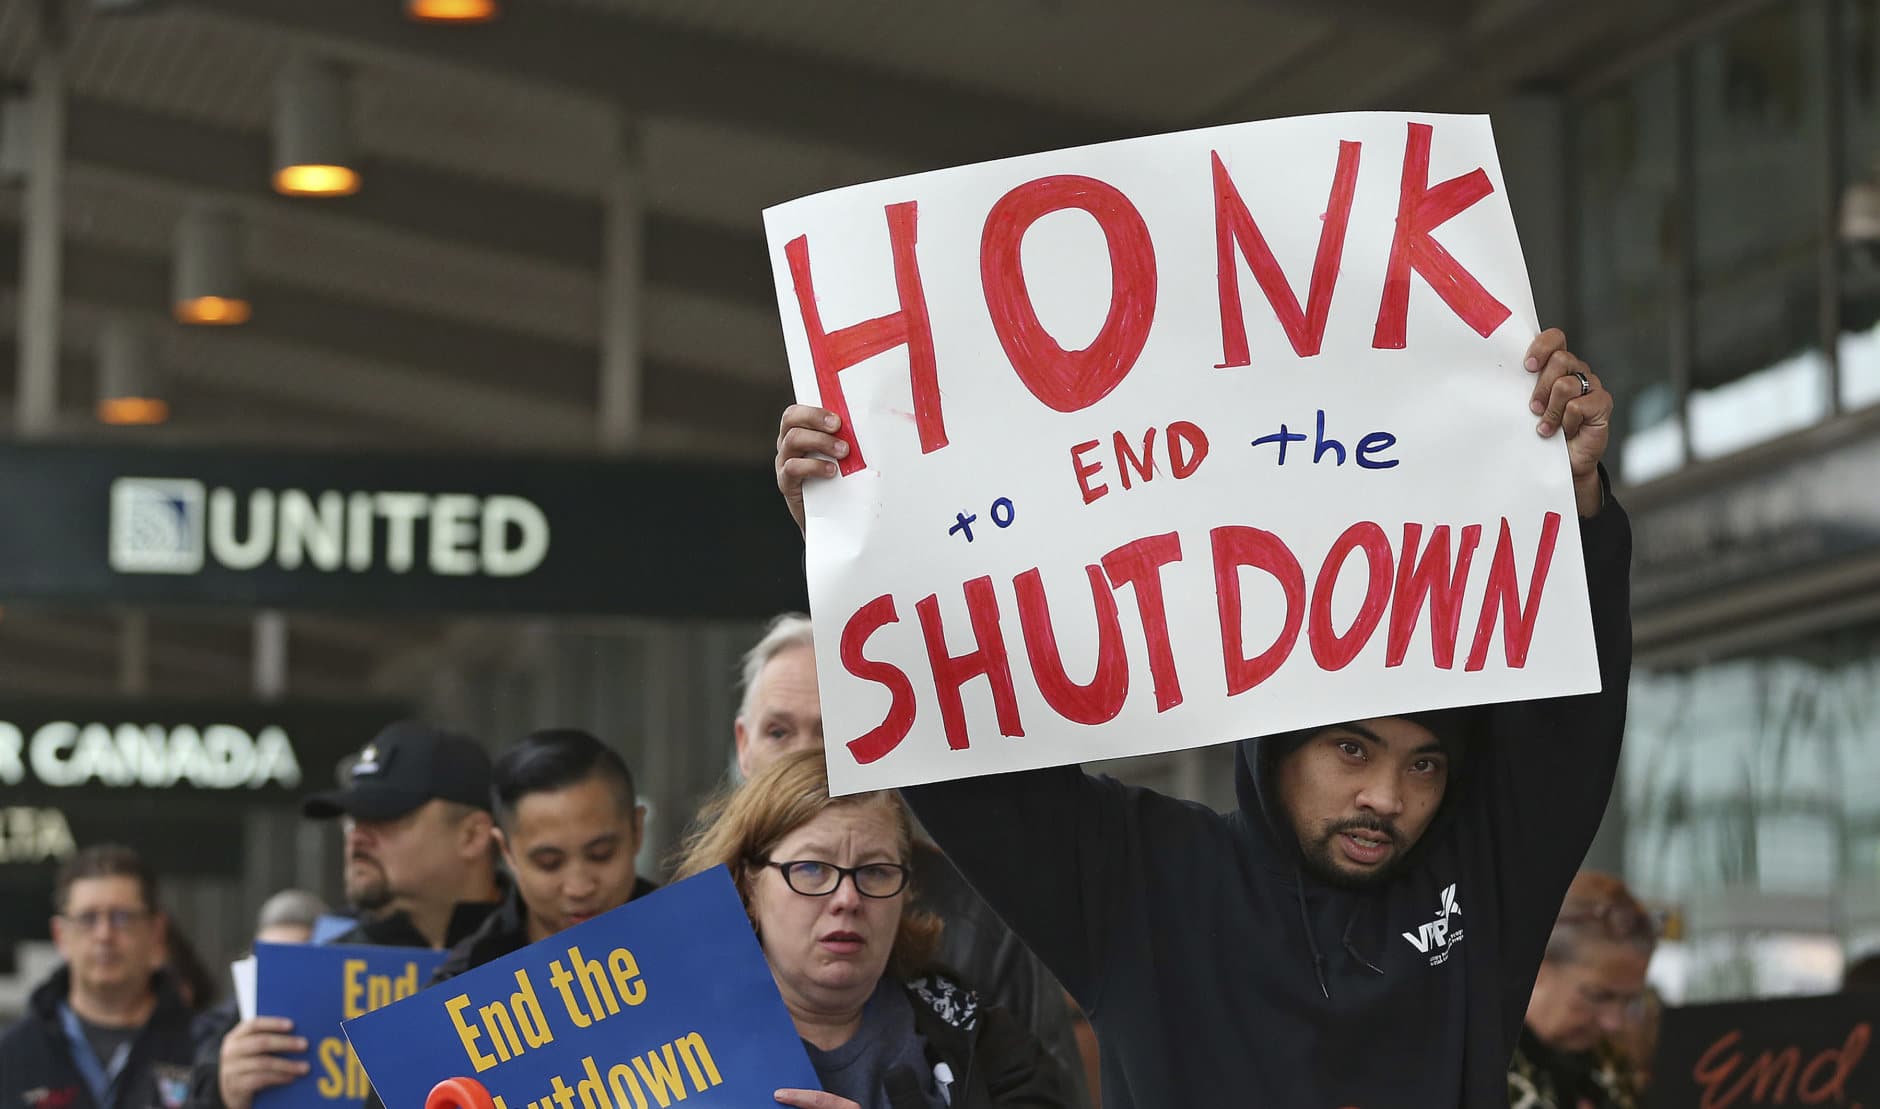 More than two dozen federal employees and supporters demonstrate at the Sacramento International Airport calling for President Donald Trump and Washington lawmakers to end then partial government shutdown, Wednesday, Jan. 16, 2019, in Sacramento, Calif. (AP Photo/Rich Pedroncelli)